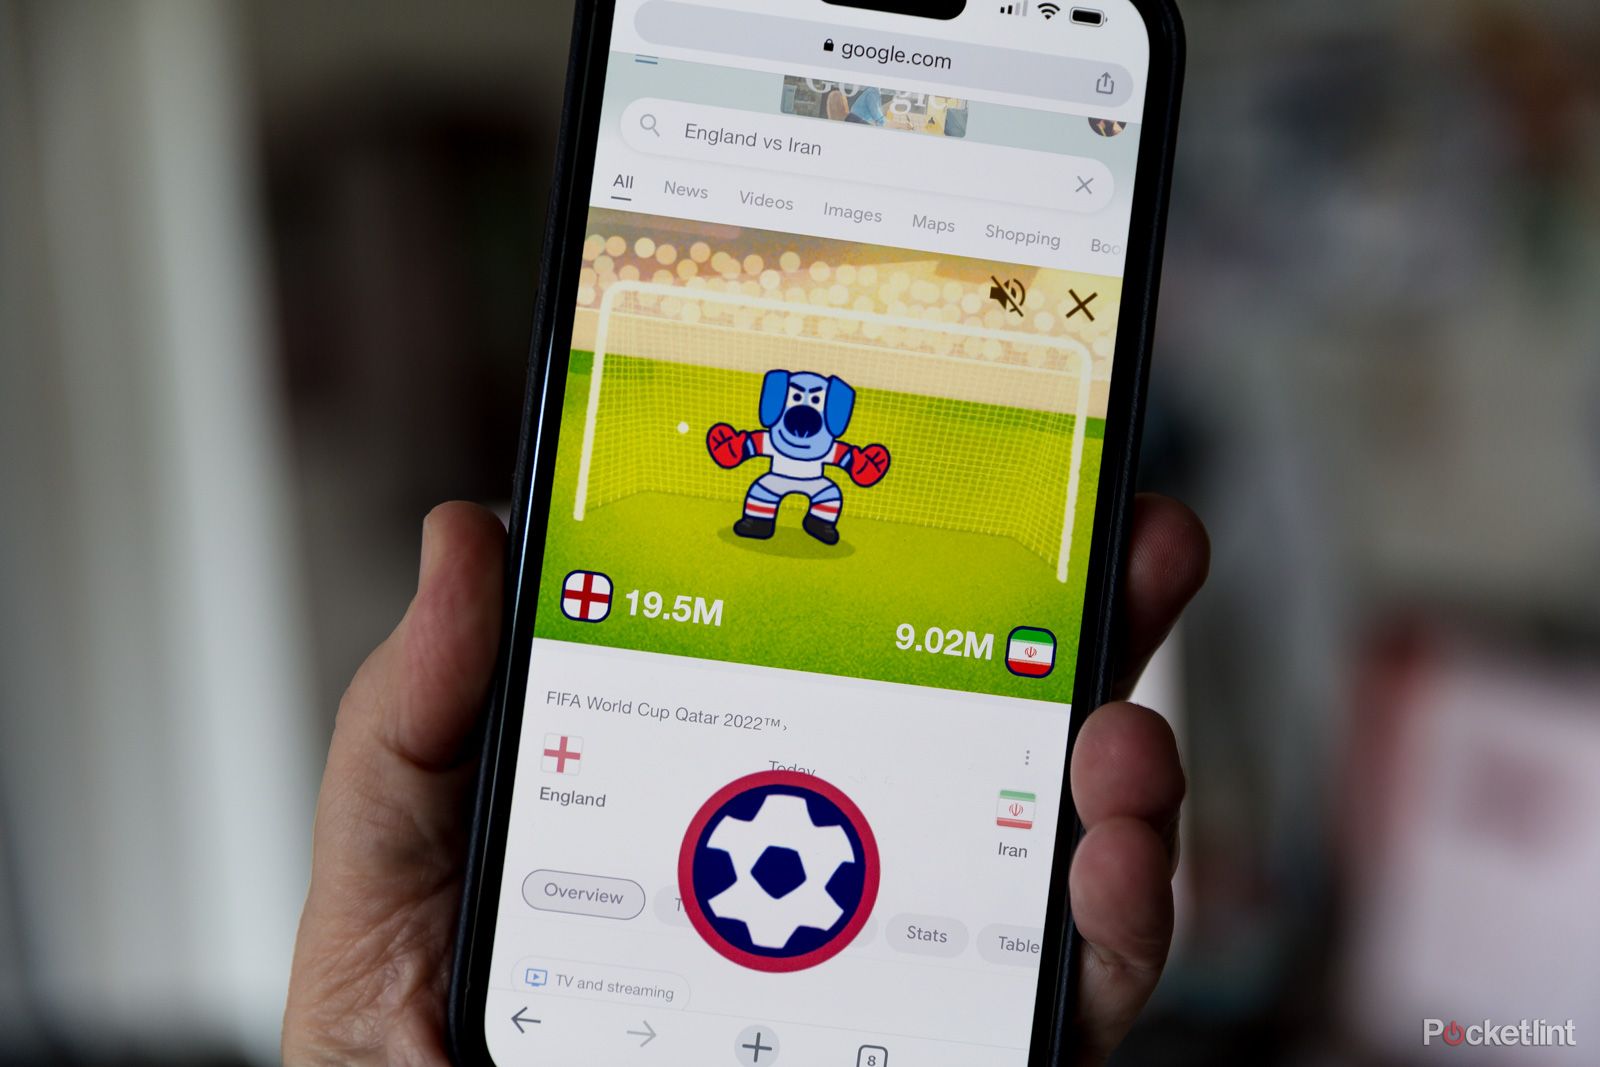 How to Play Google Football Mini Cup Game